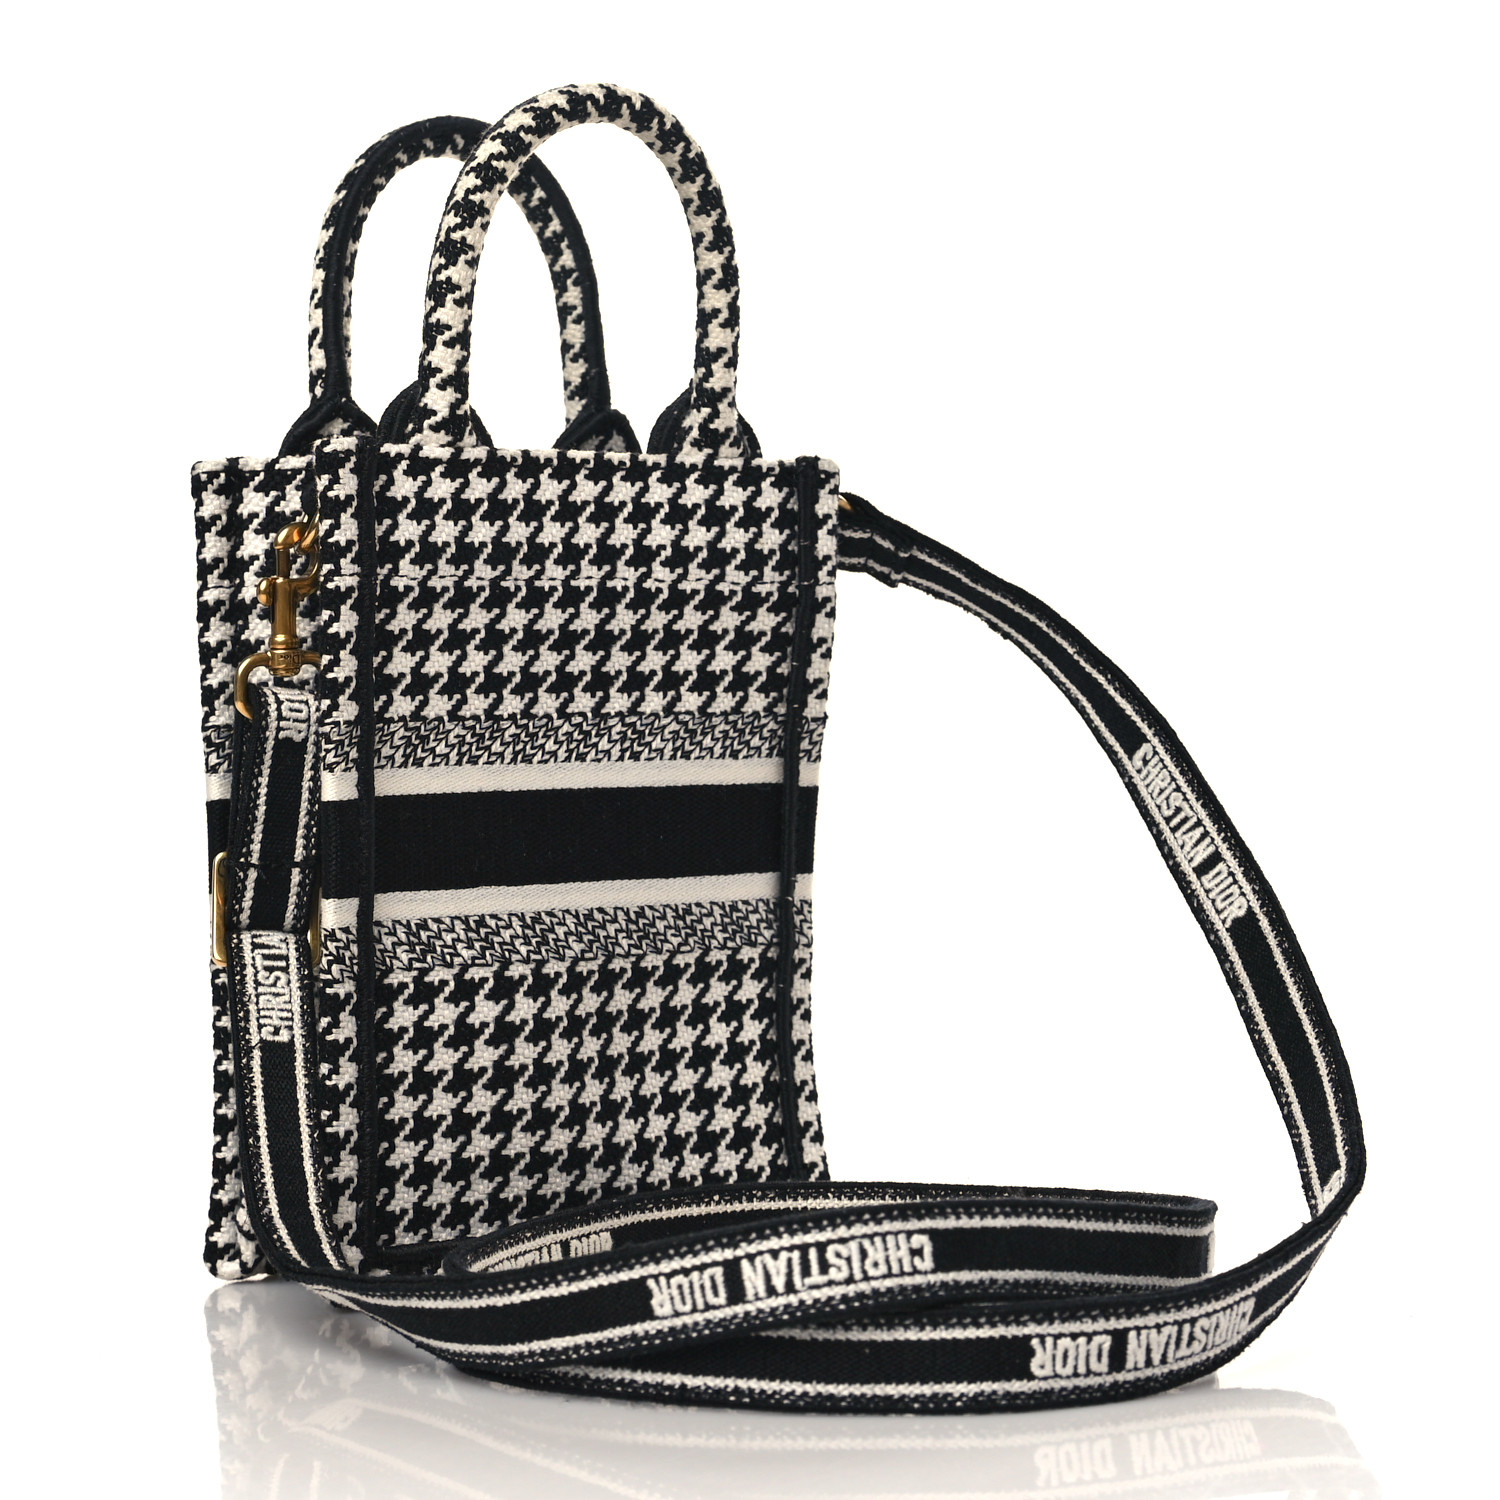 CHRISTIAN DIOR Canvas Houndstooth Embroidered Mini Book Tote Phone Bag Black White